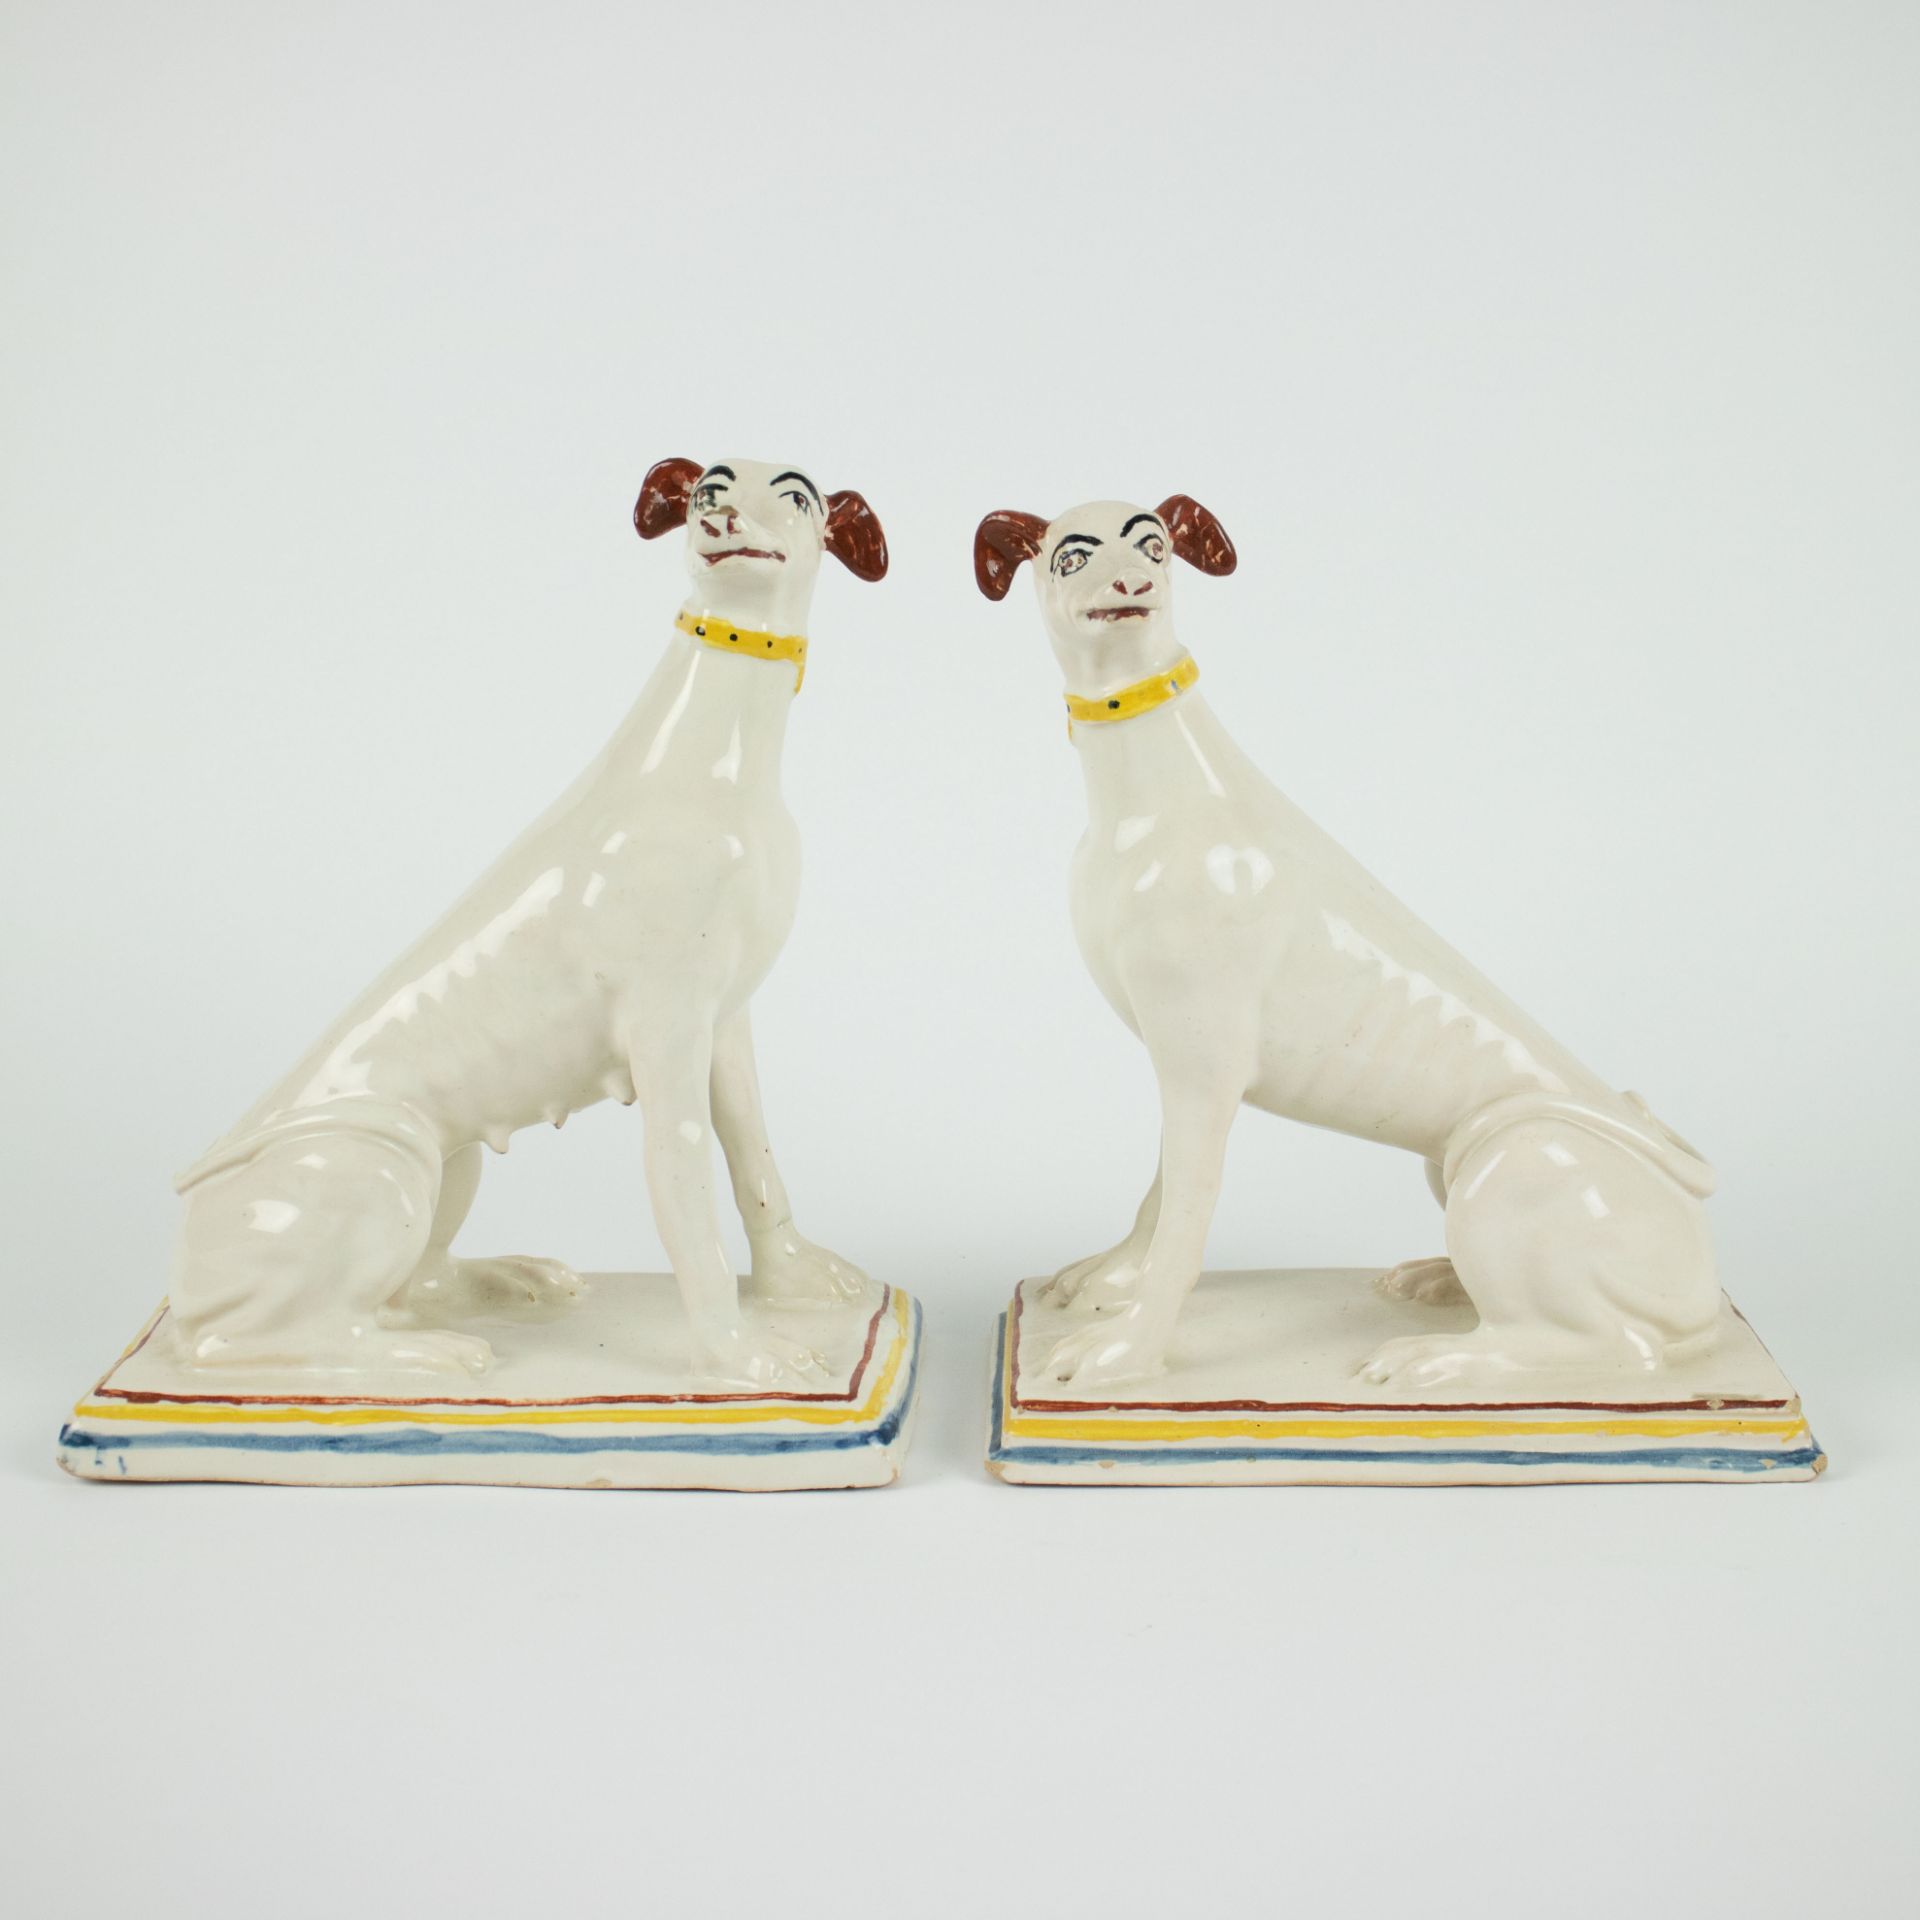 A pair of dogs in Brussels pottery